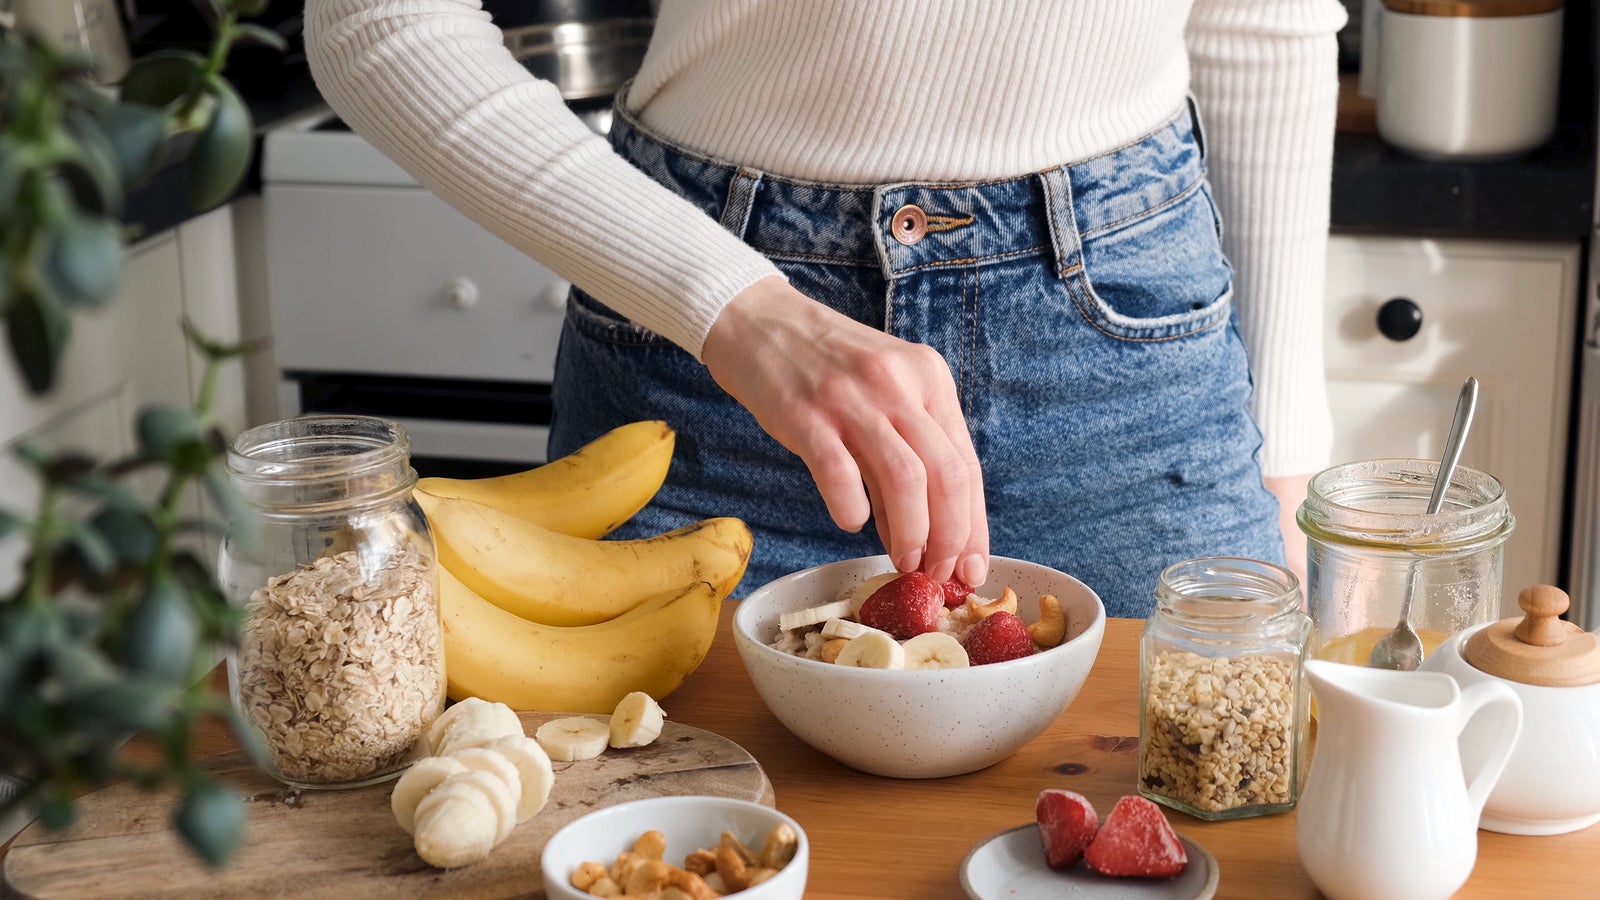 Adding fruits to breakfast oatmeal porridge bowl. Woman preparing healthy breakfast at the kitchen. Concept of healthy eating and lifestyle